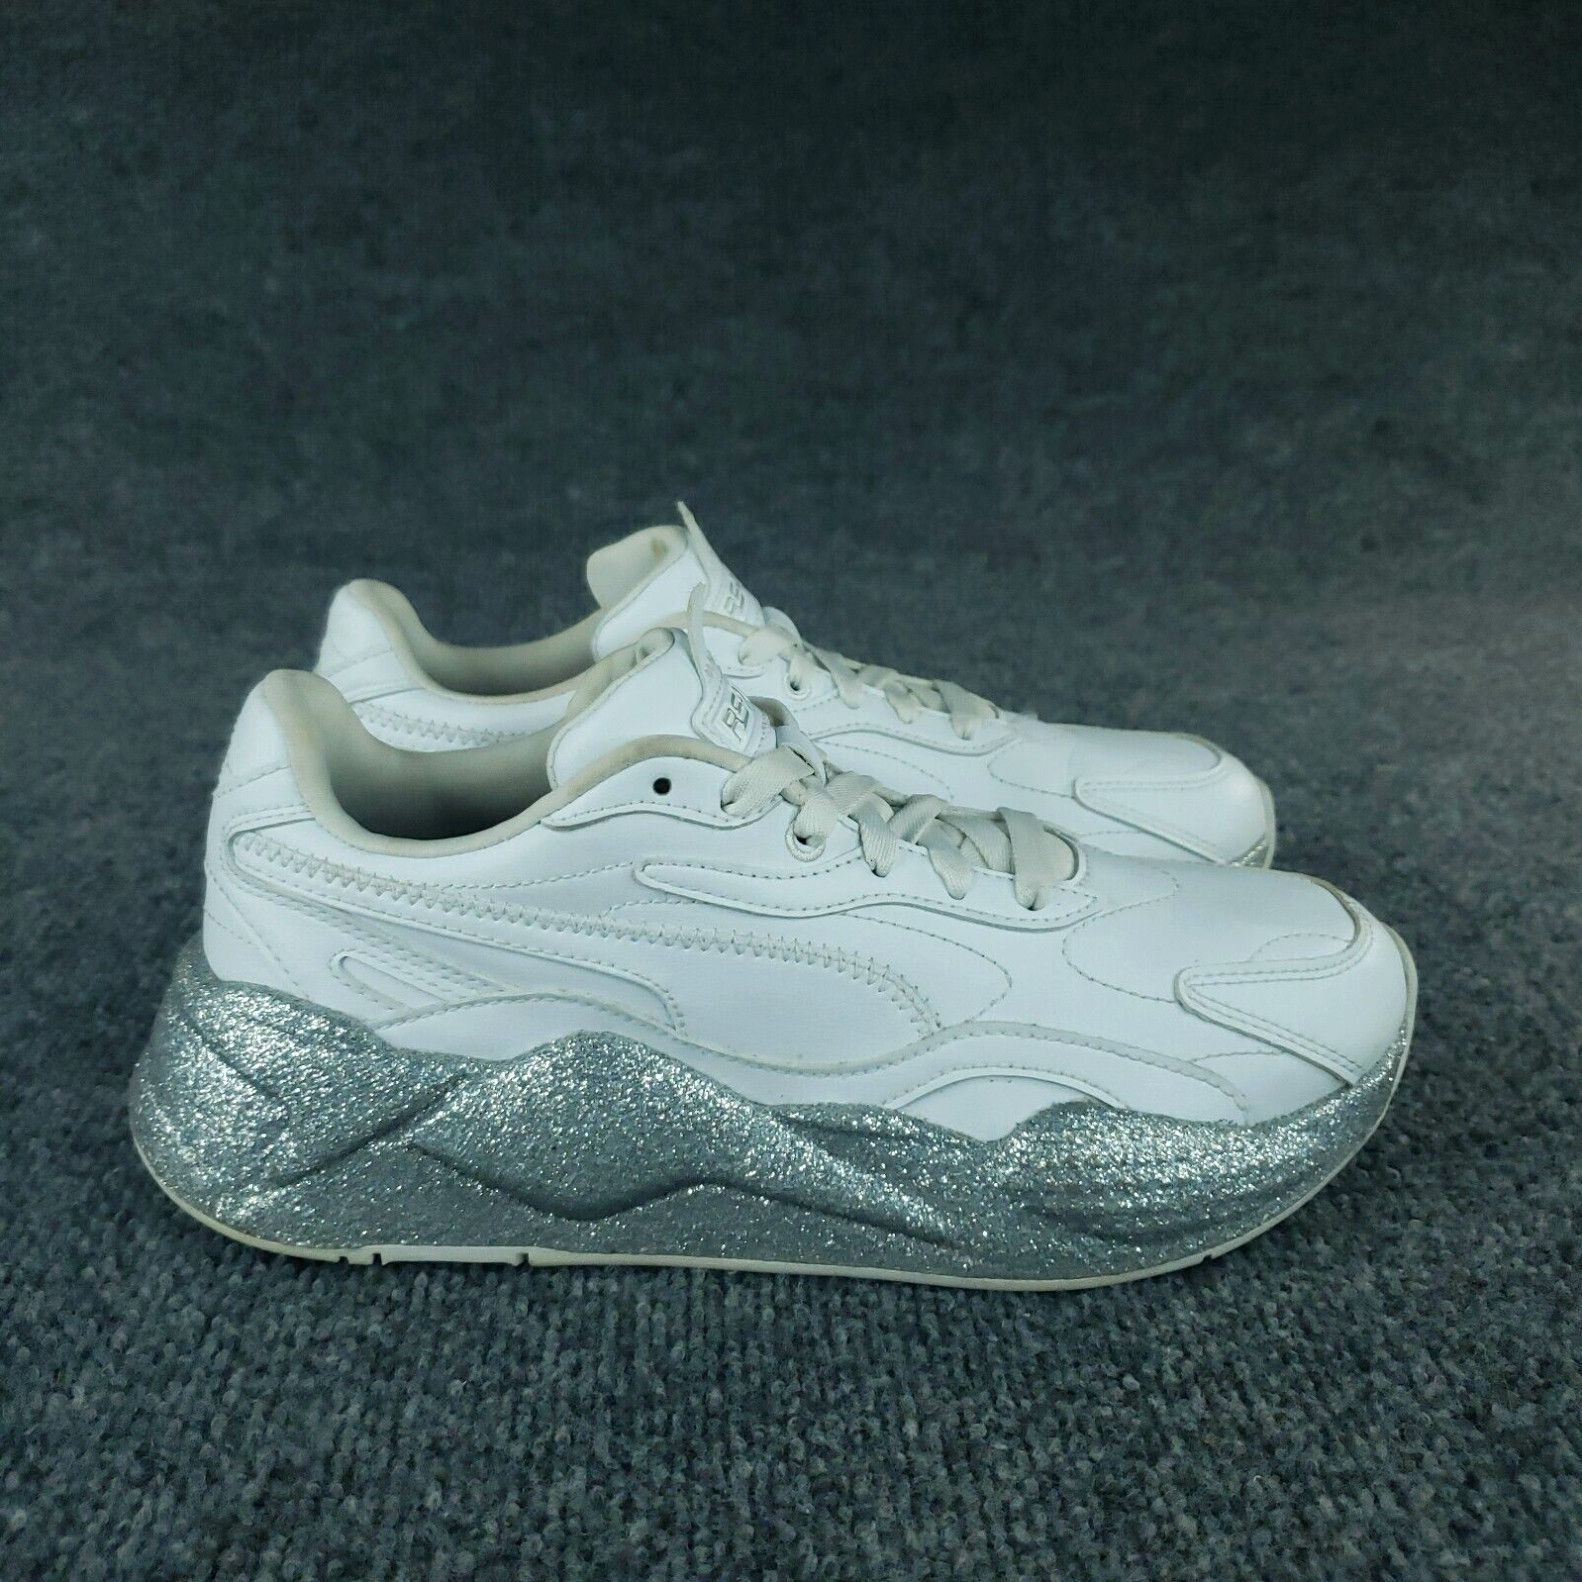 Puma Puma RS X3 Glitz Shoes Womens 8.5 White Silver Running Sneakers 372647-01 Size ONE SIZE - 1 Preview